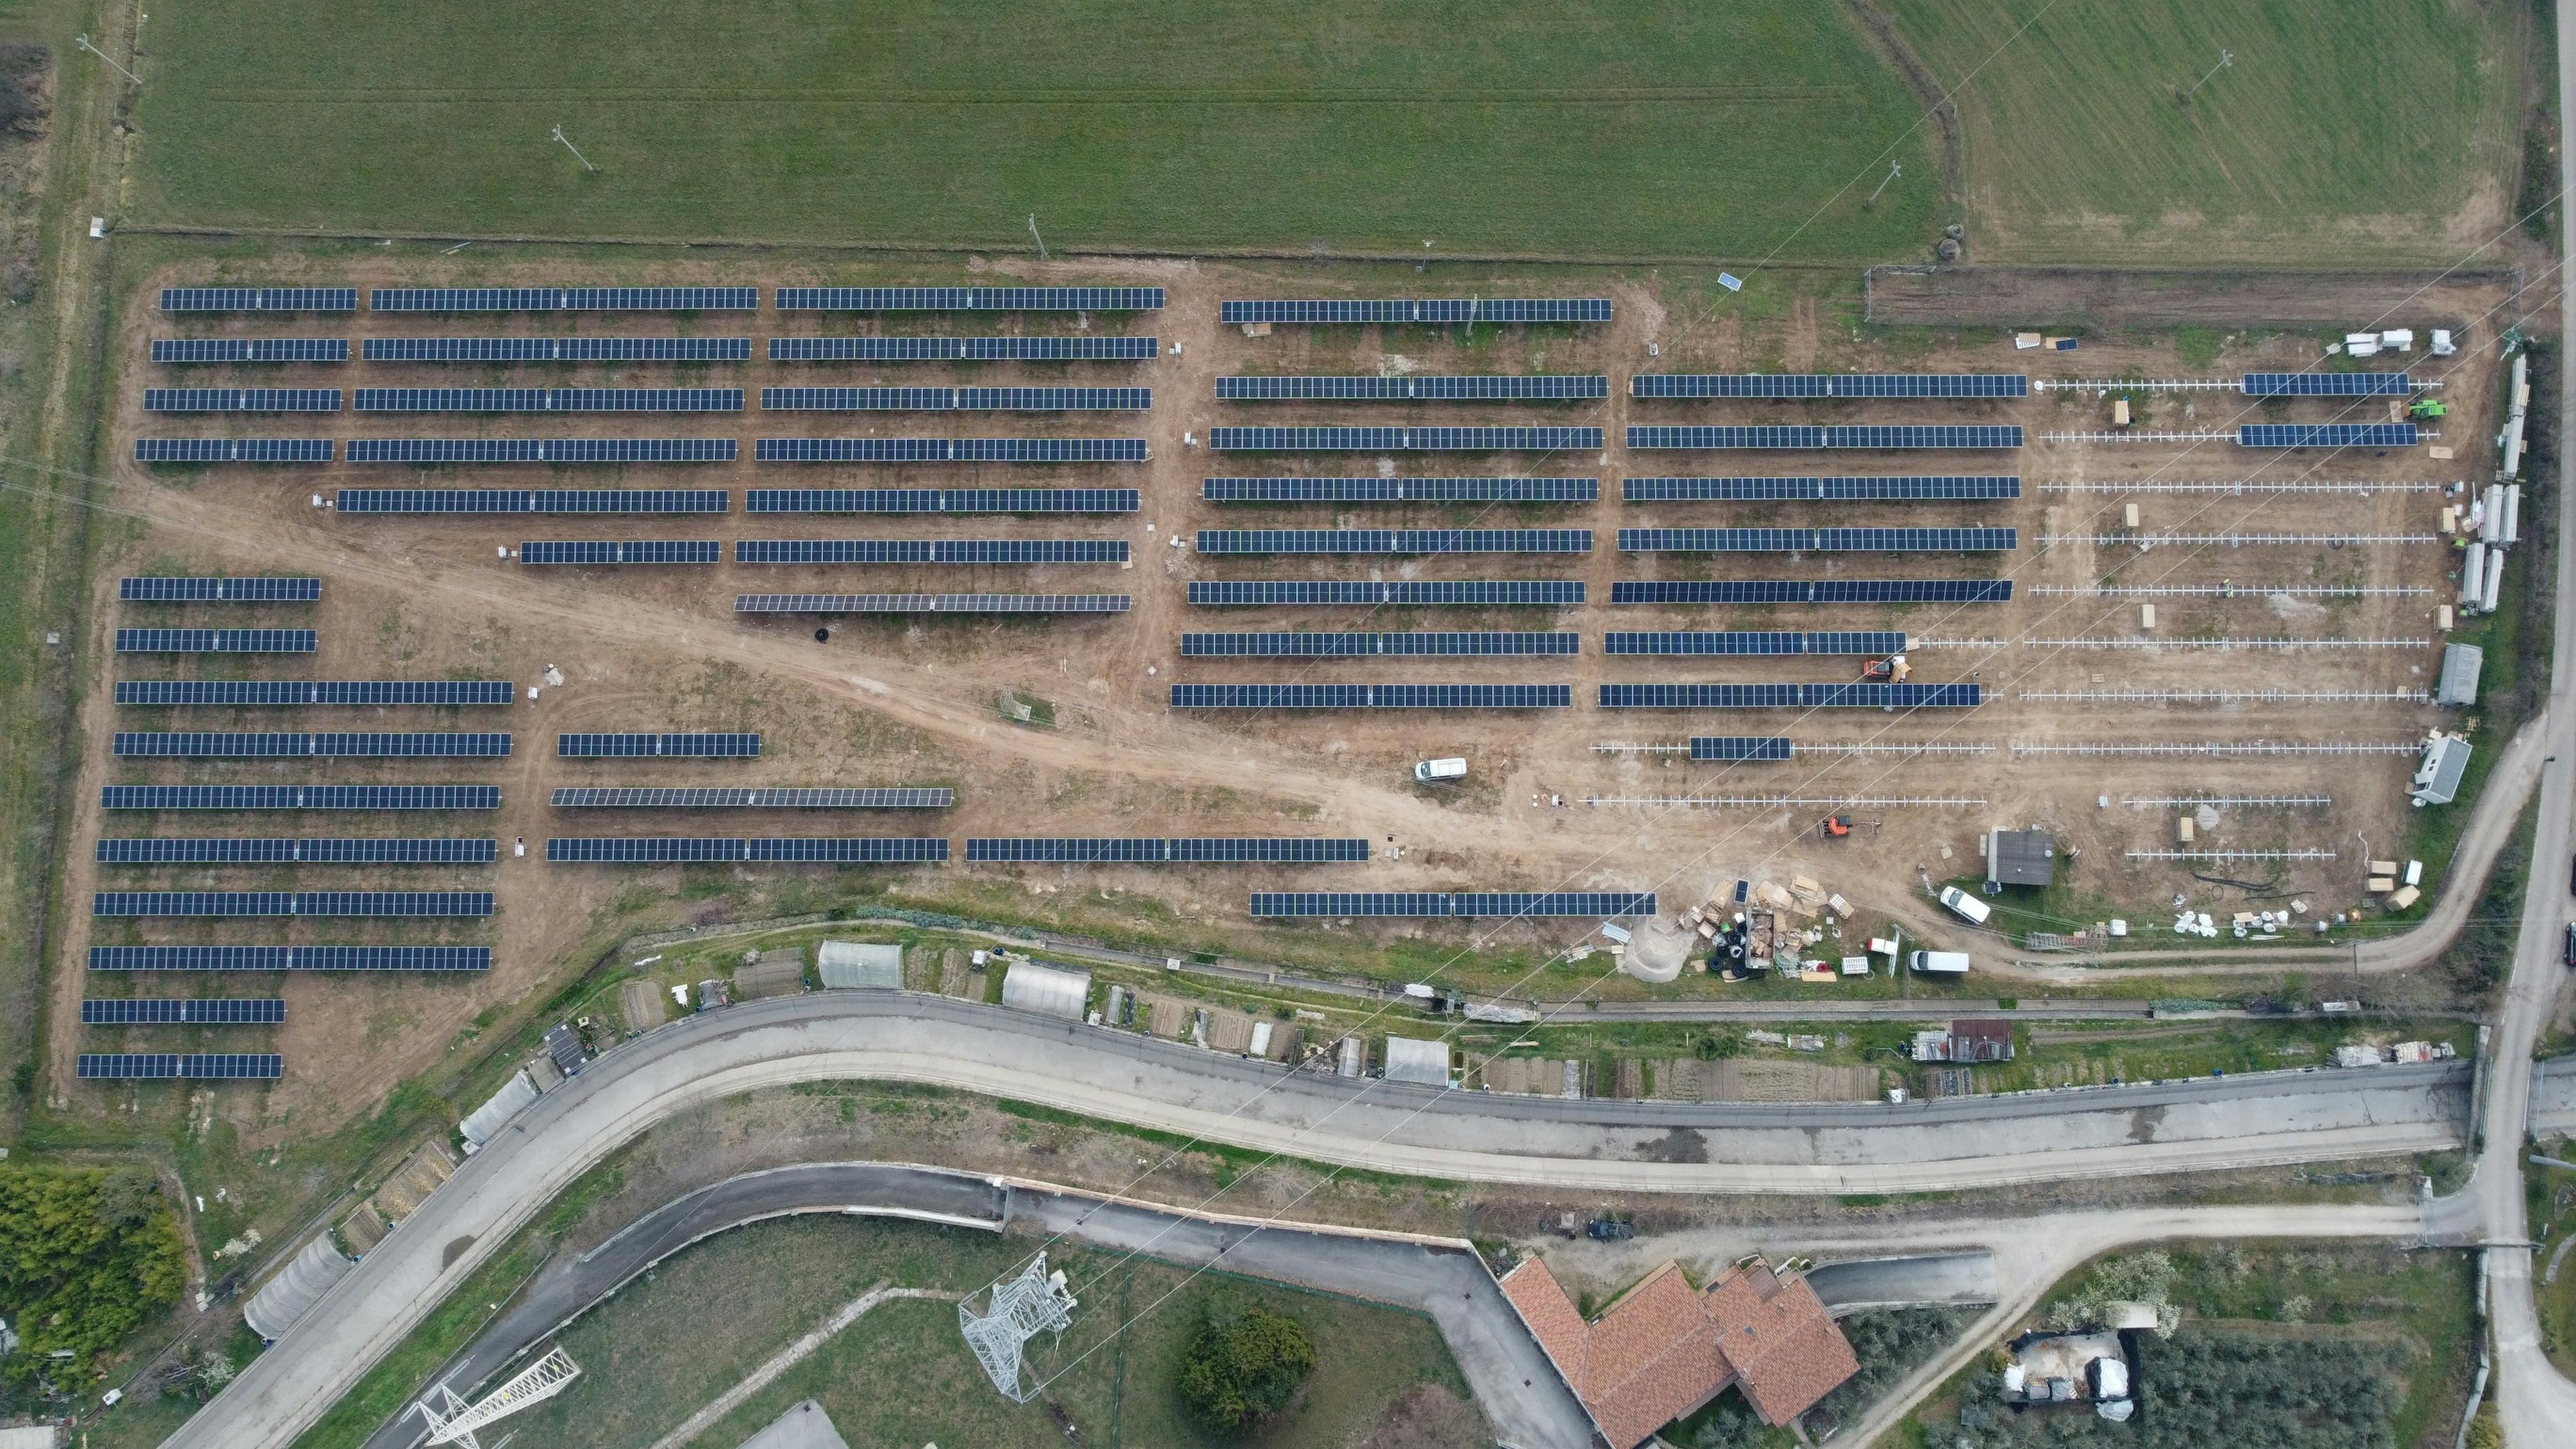 Freefield PV from a bird's perspective